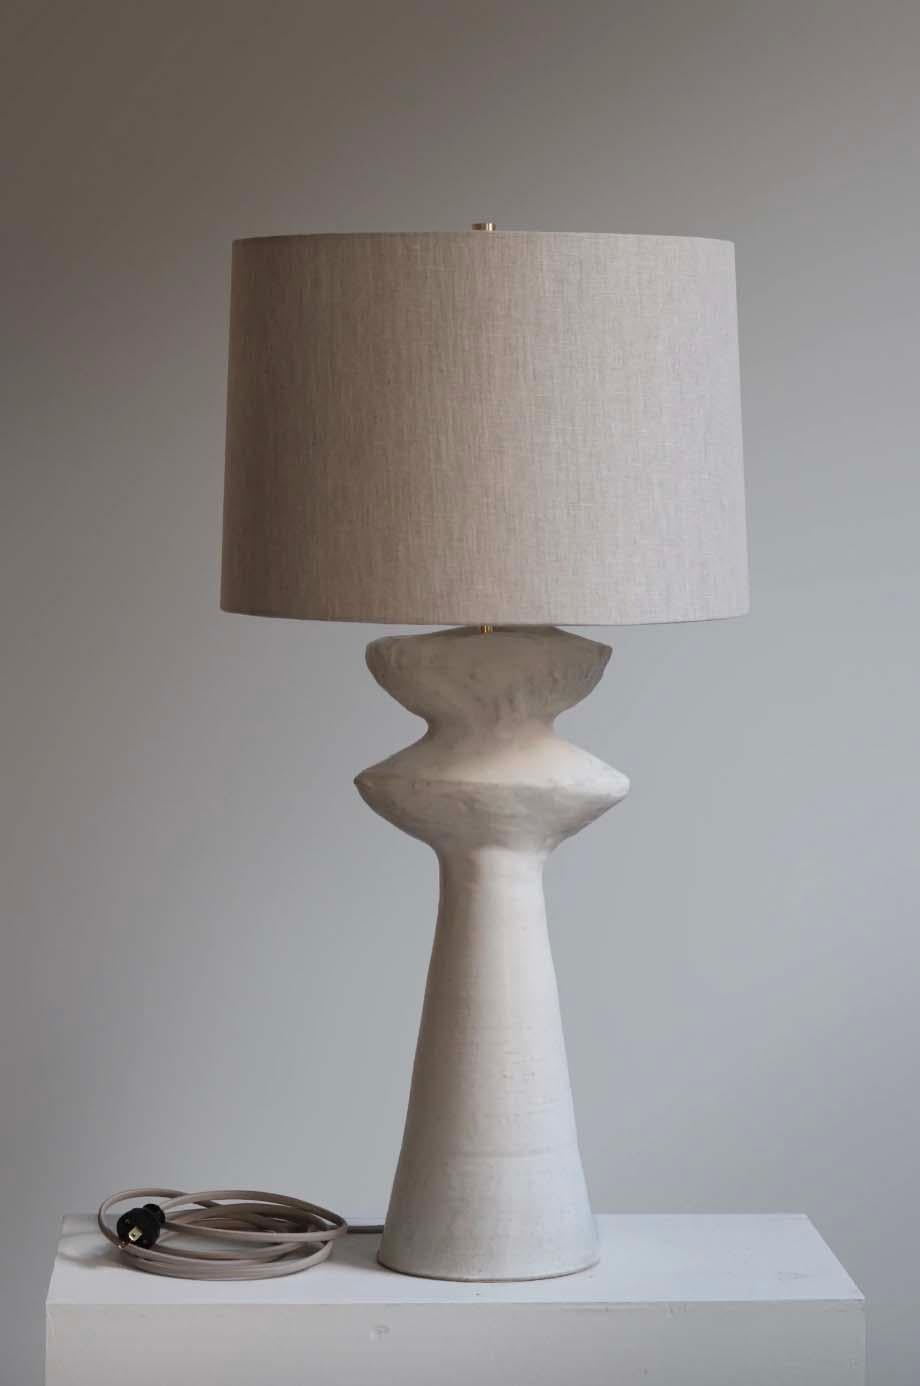 The Cicero lamp is handmade studio pottery by ceramic artist by Danny Kaplan. Shade included. Please note dimensions may vary up to an inch.

Born in New York City and raised in Aix-en-Provence, France, Danny Kaplan’s passion for ceramics was shaped